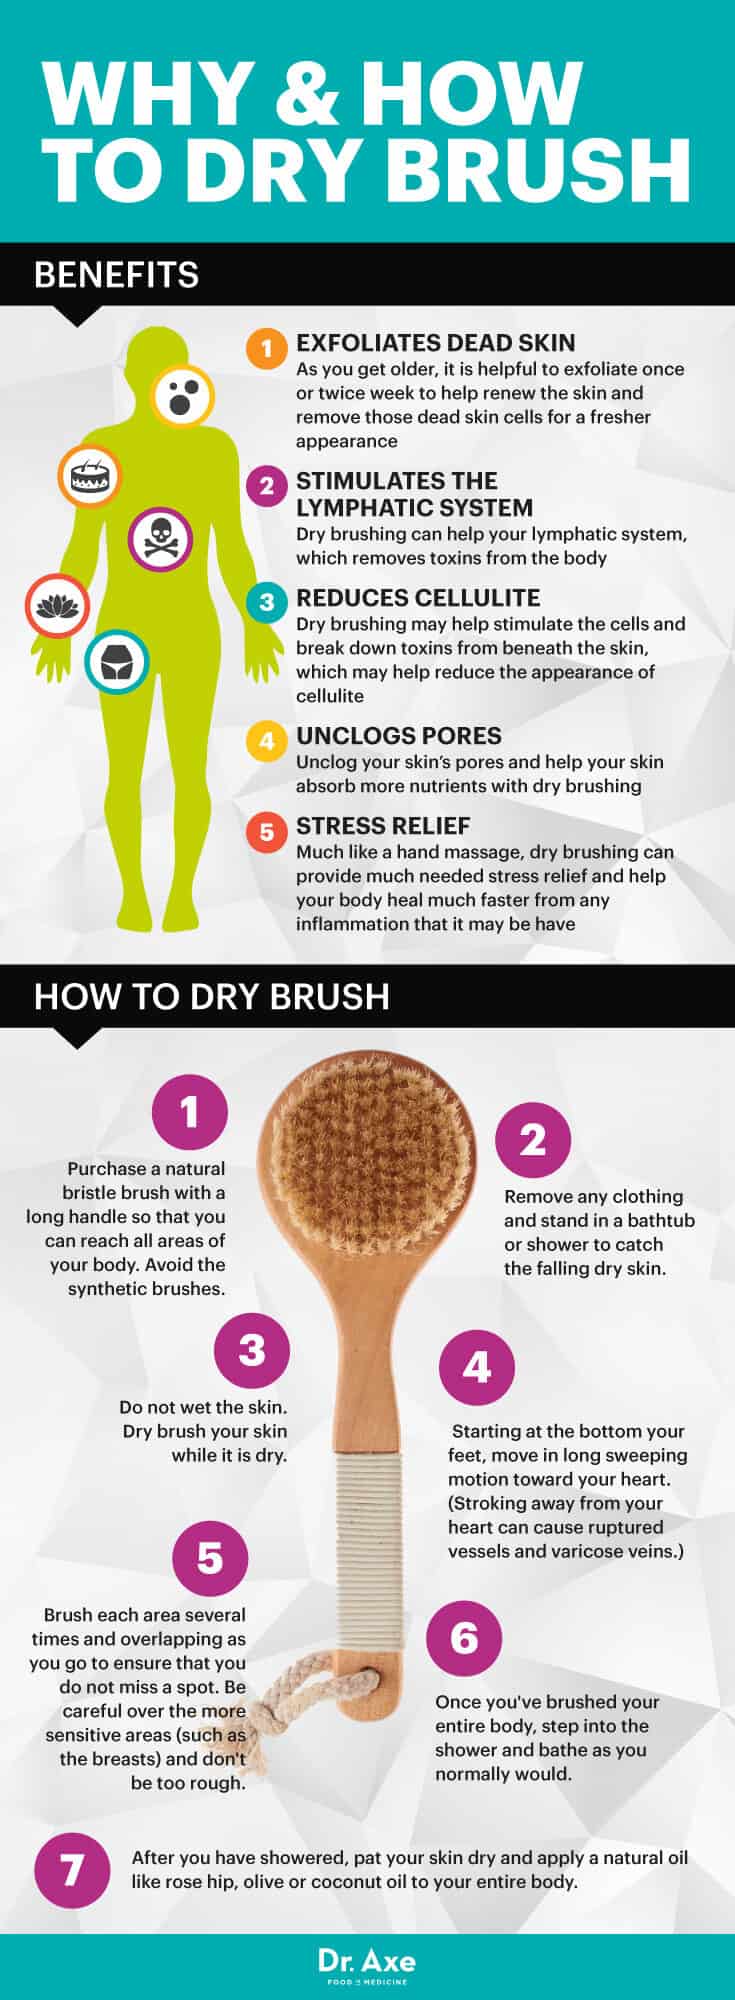 Start Dry Brushing to Reduce Cellulite + Toxins - Dr. Axe